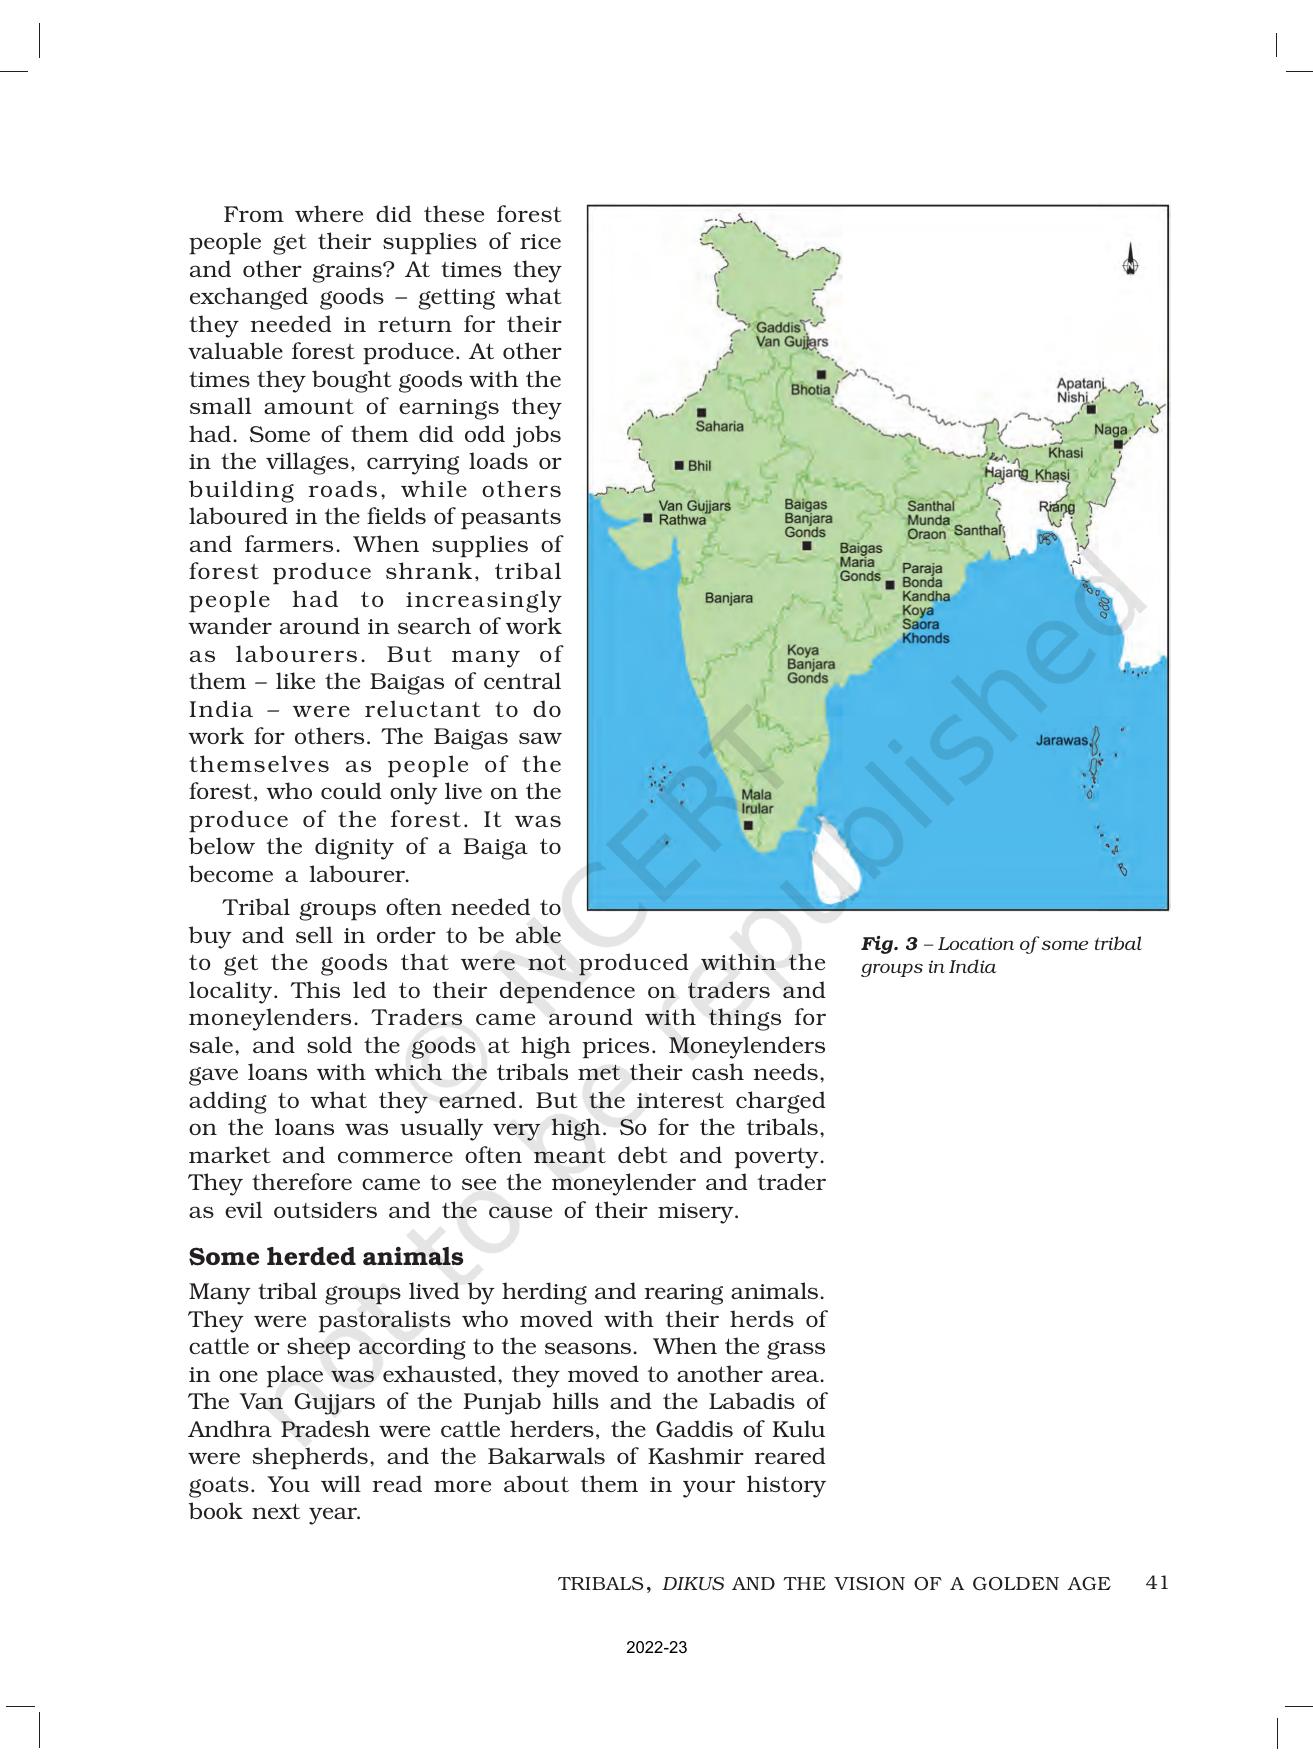 NCERT Book for Class 8 History Chapter 4 Tribals, Dikus and the Vision of a Golden Age - Page 3